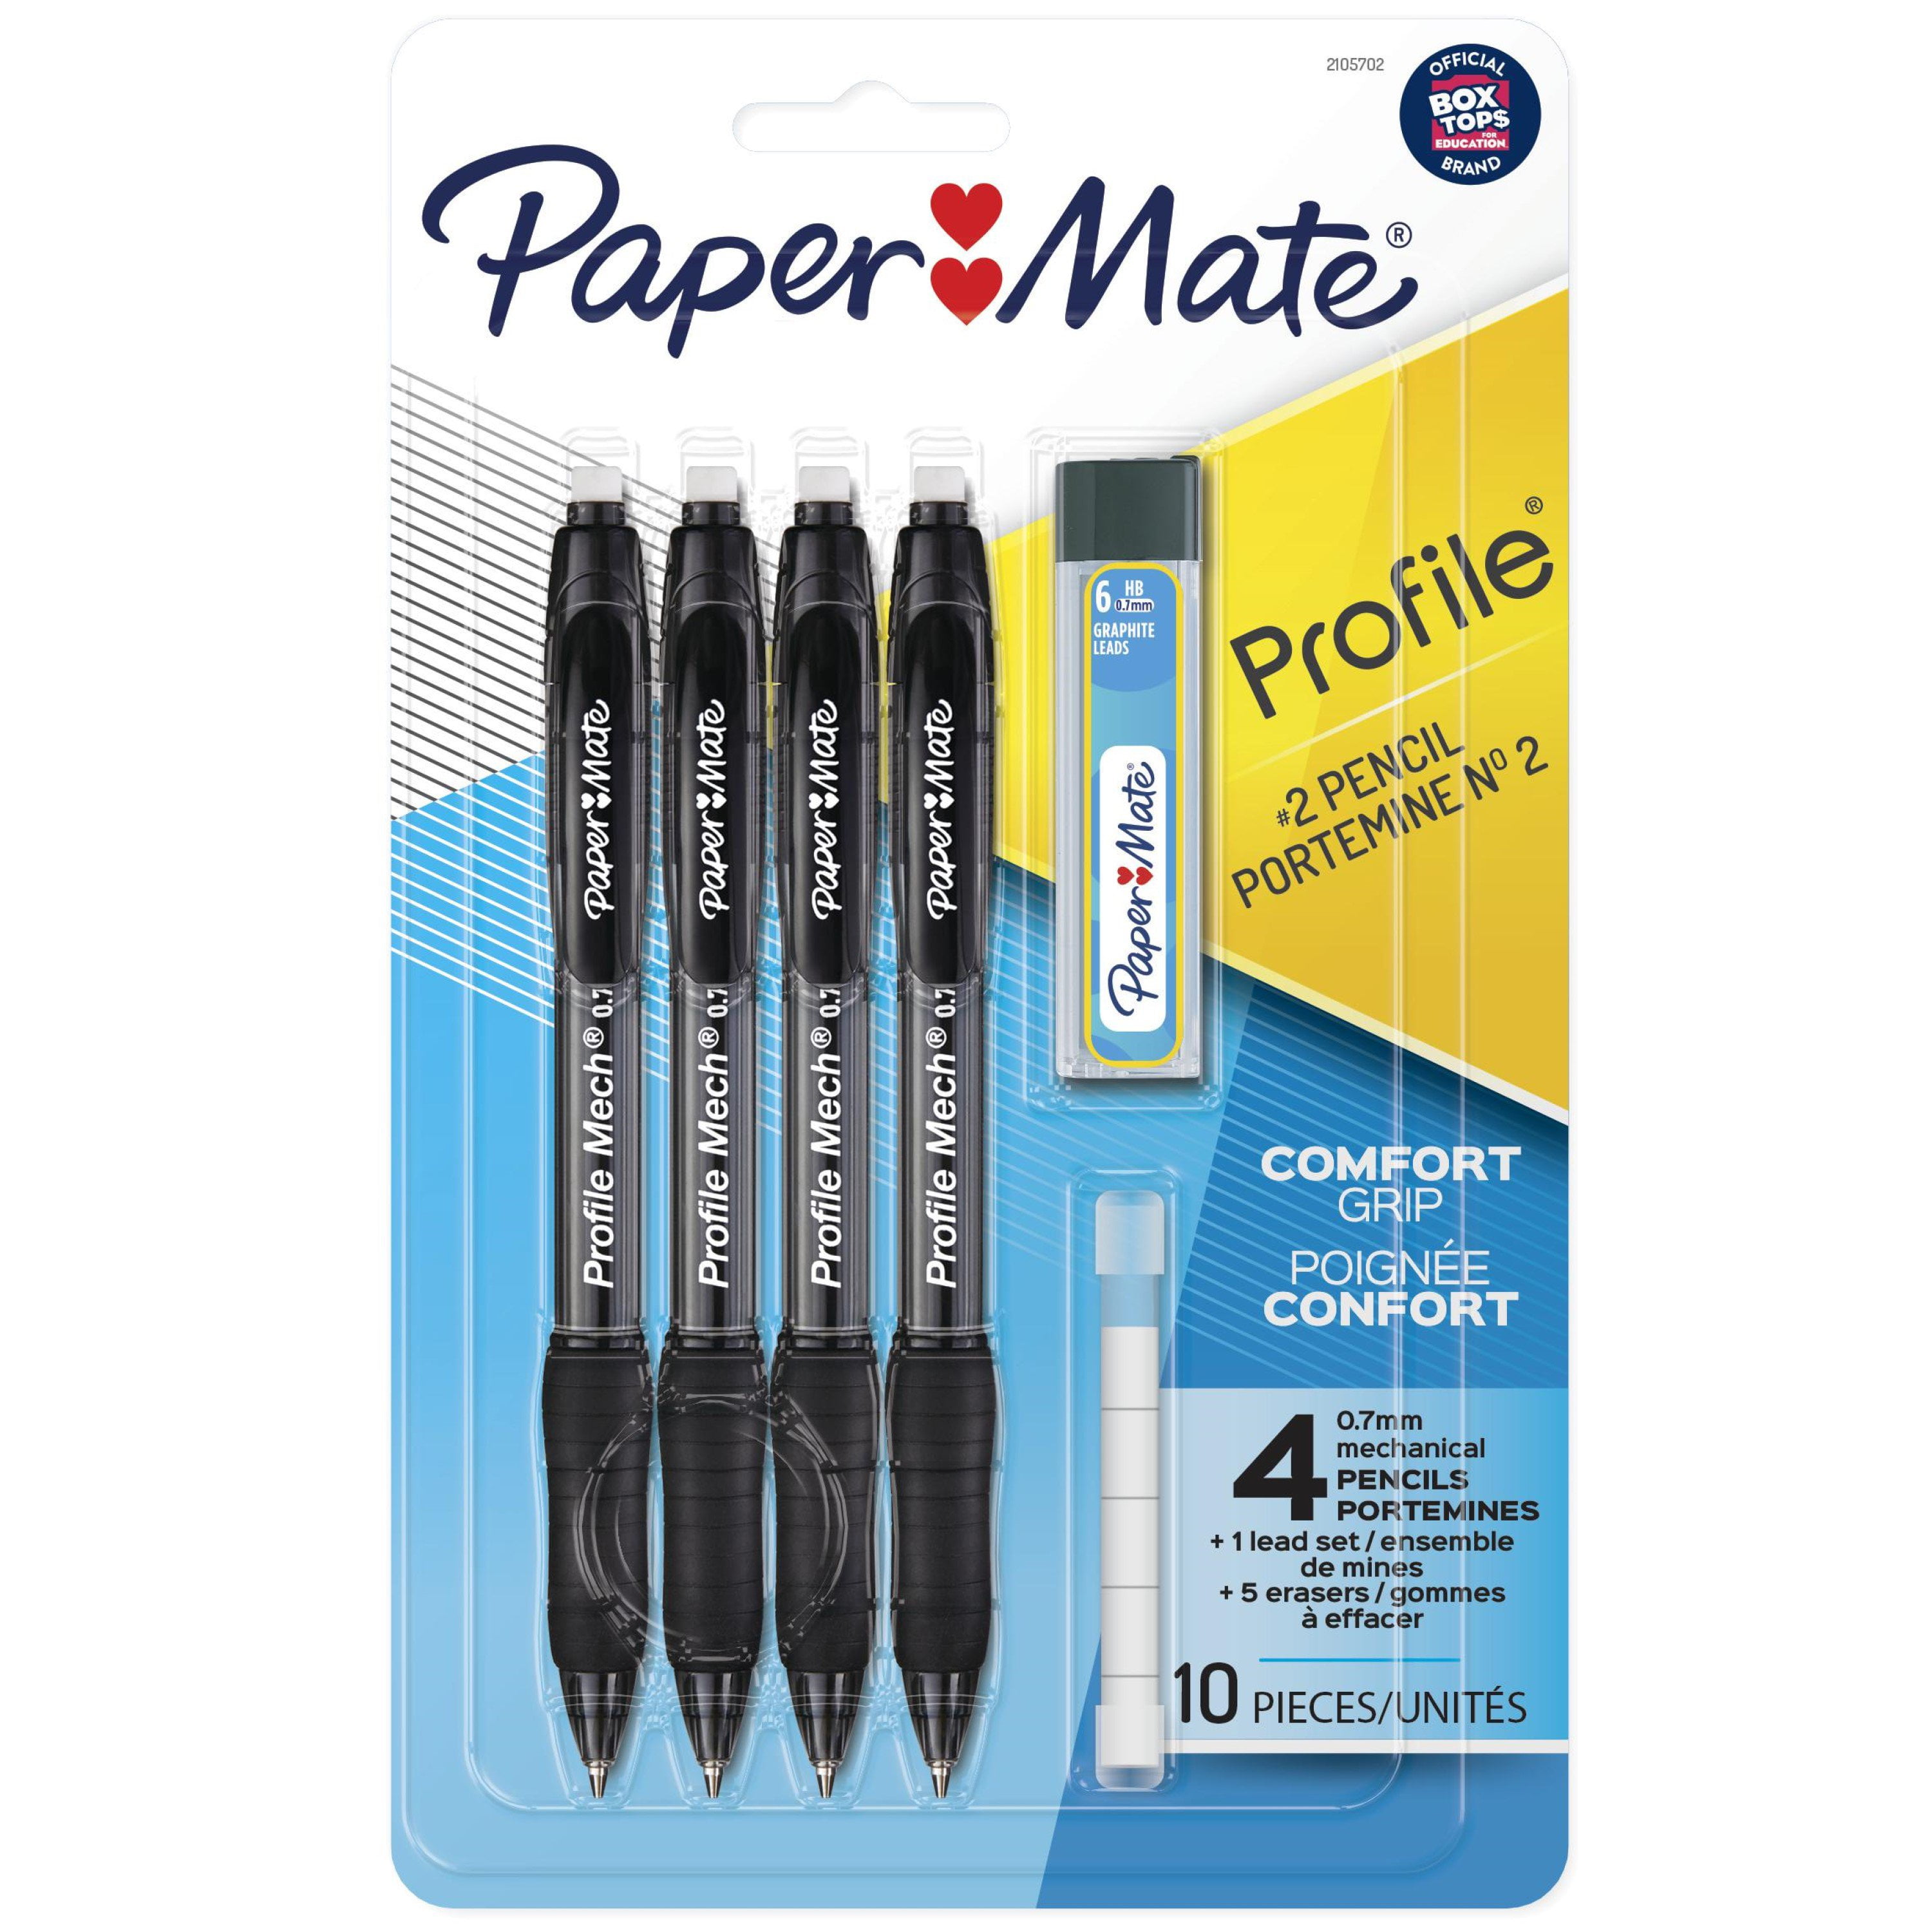 Papermate Cartridge 12 Leads HB 0.5mm Lot Of 50 Mechanical Pencil Refills NEW 